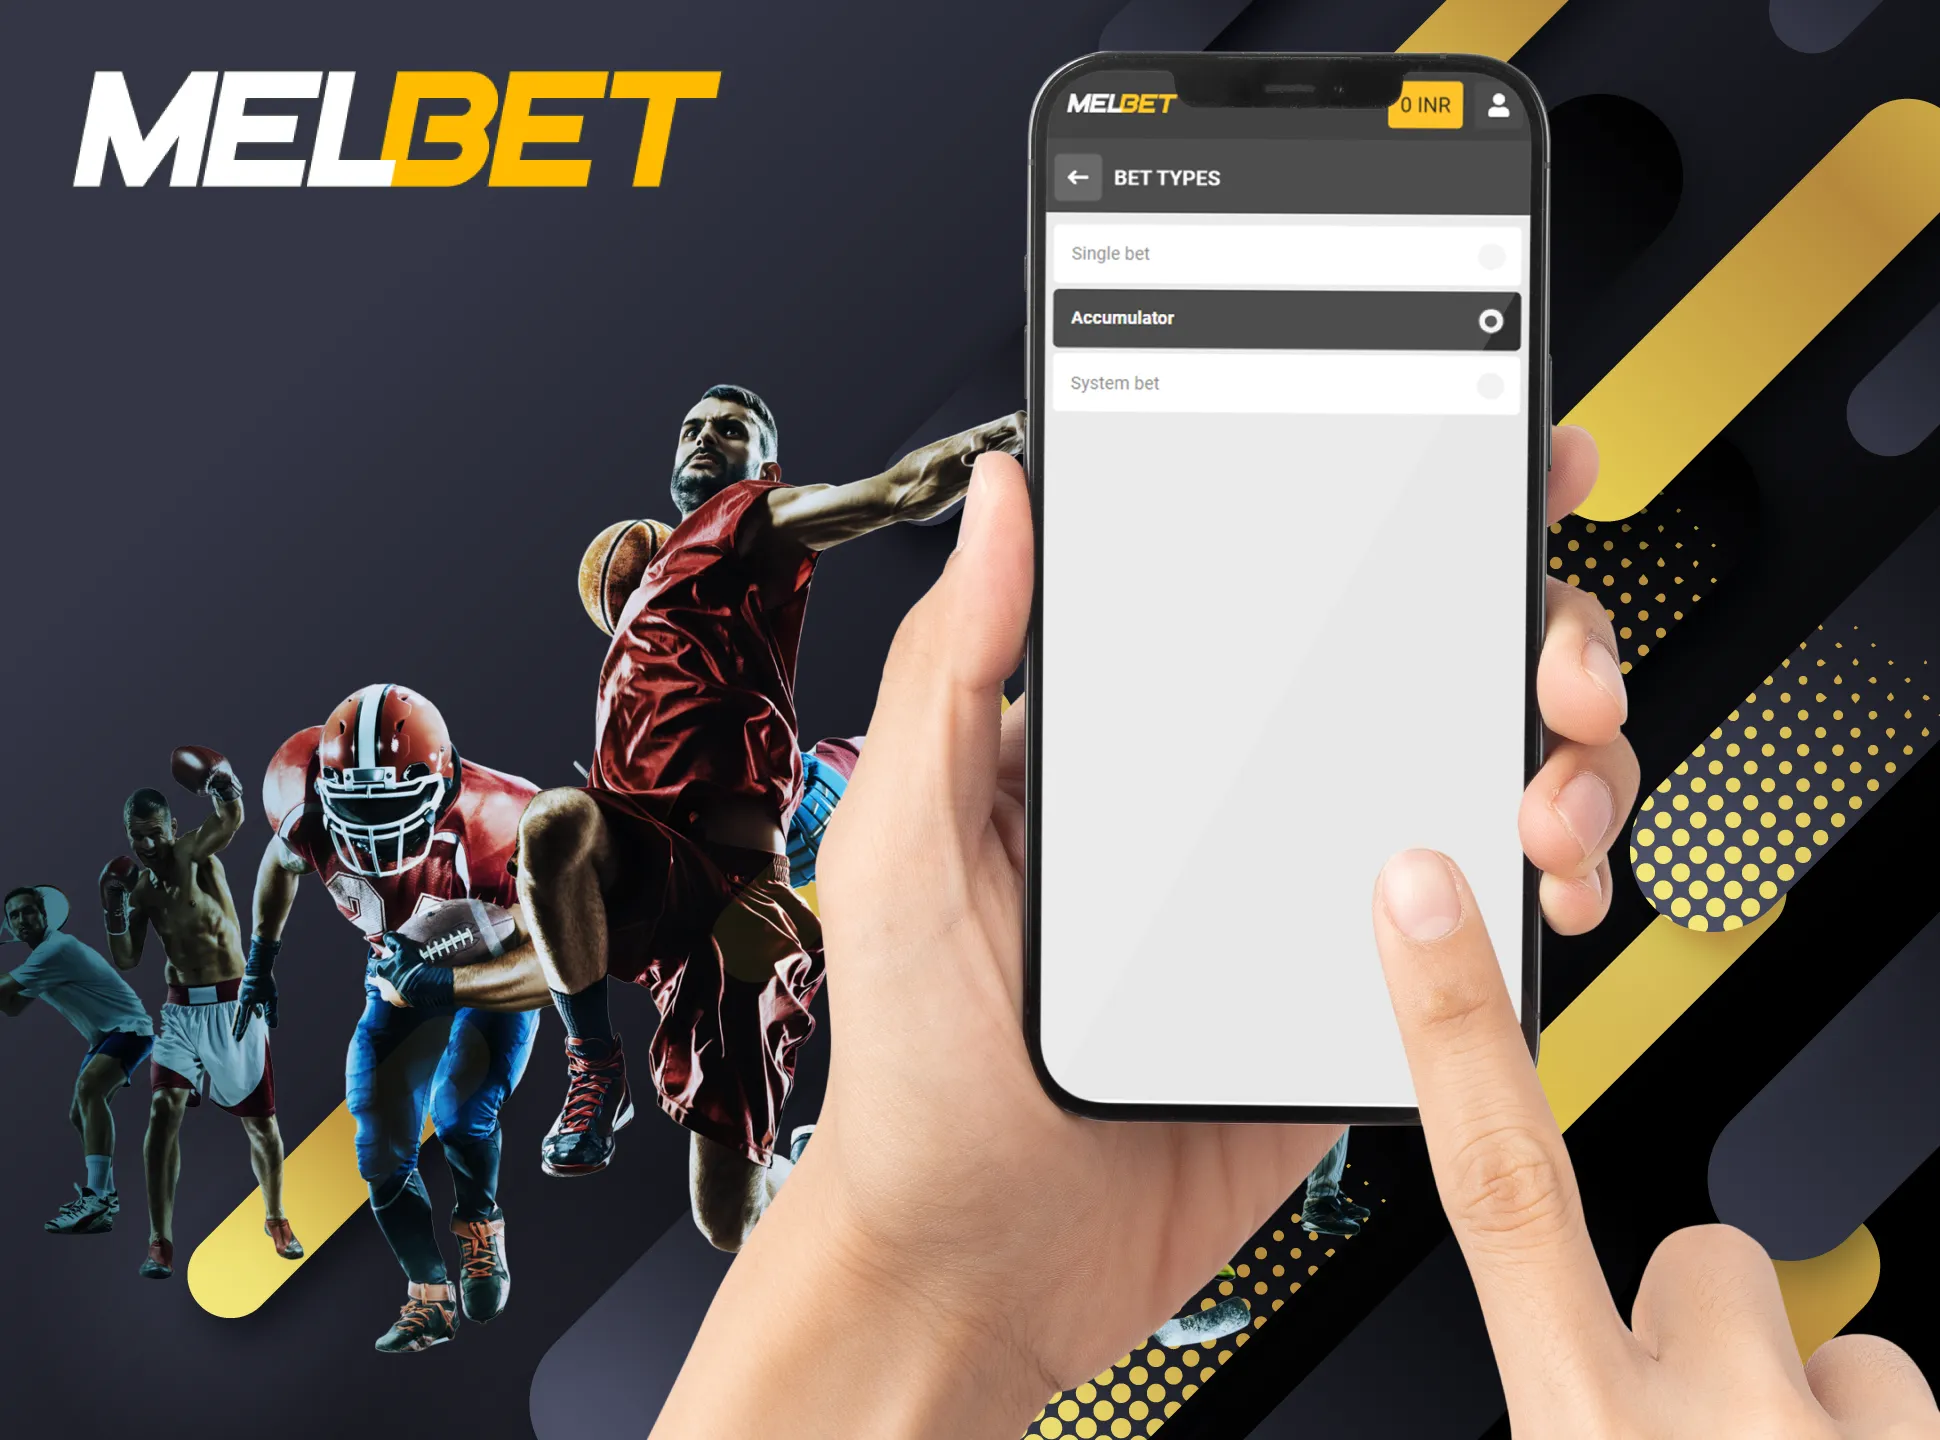 Place single, system or combo bets in the Melbet app.